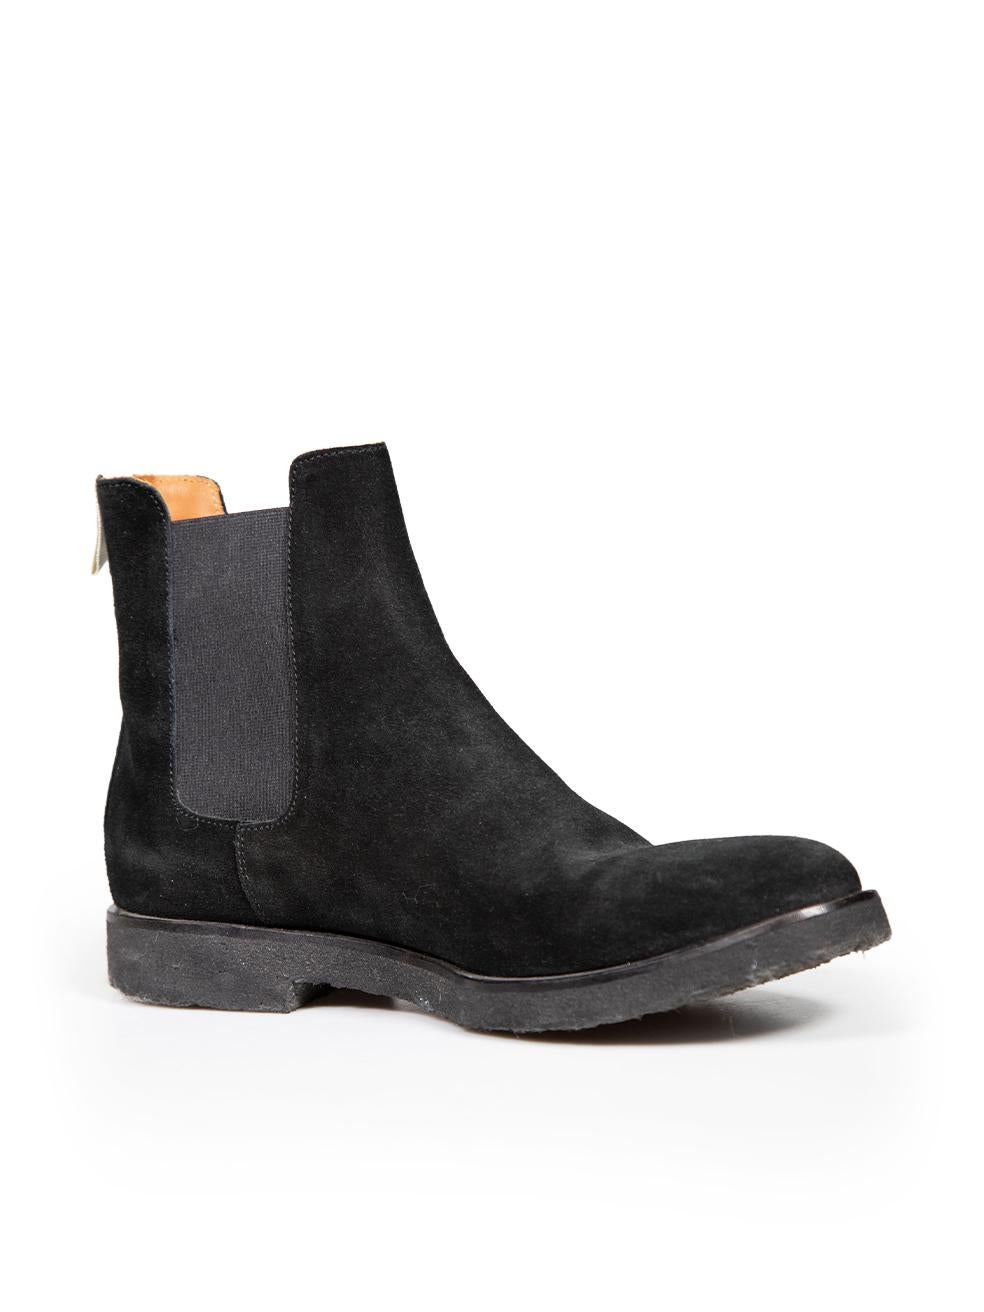 CONDITION is Very good. Minimal wear to boots is evident. Minimal creasing to uppers on this used Common Projects designer resale item.
 
 
 
 Details
 
 
 Black
 
 Suede
 
 Chelsea boots
 
 Round toe
 
 Flat heel
 
 Elasticated sides
 
 Sizing